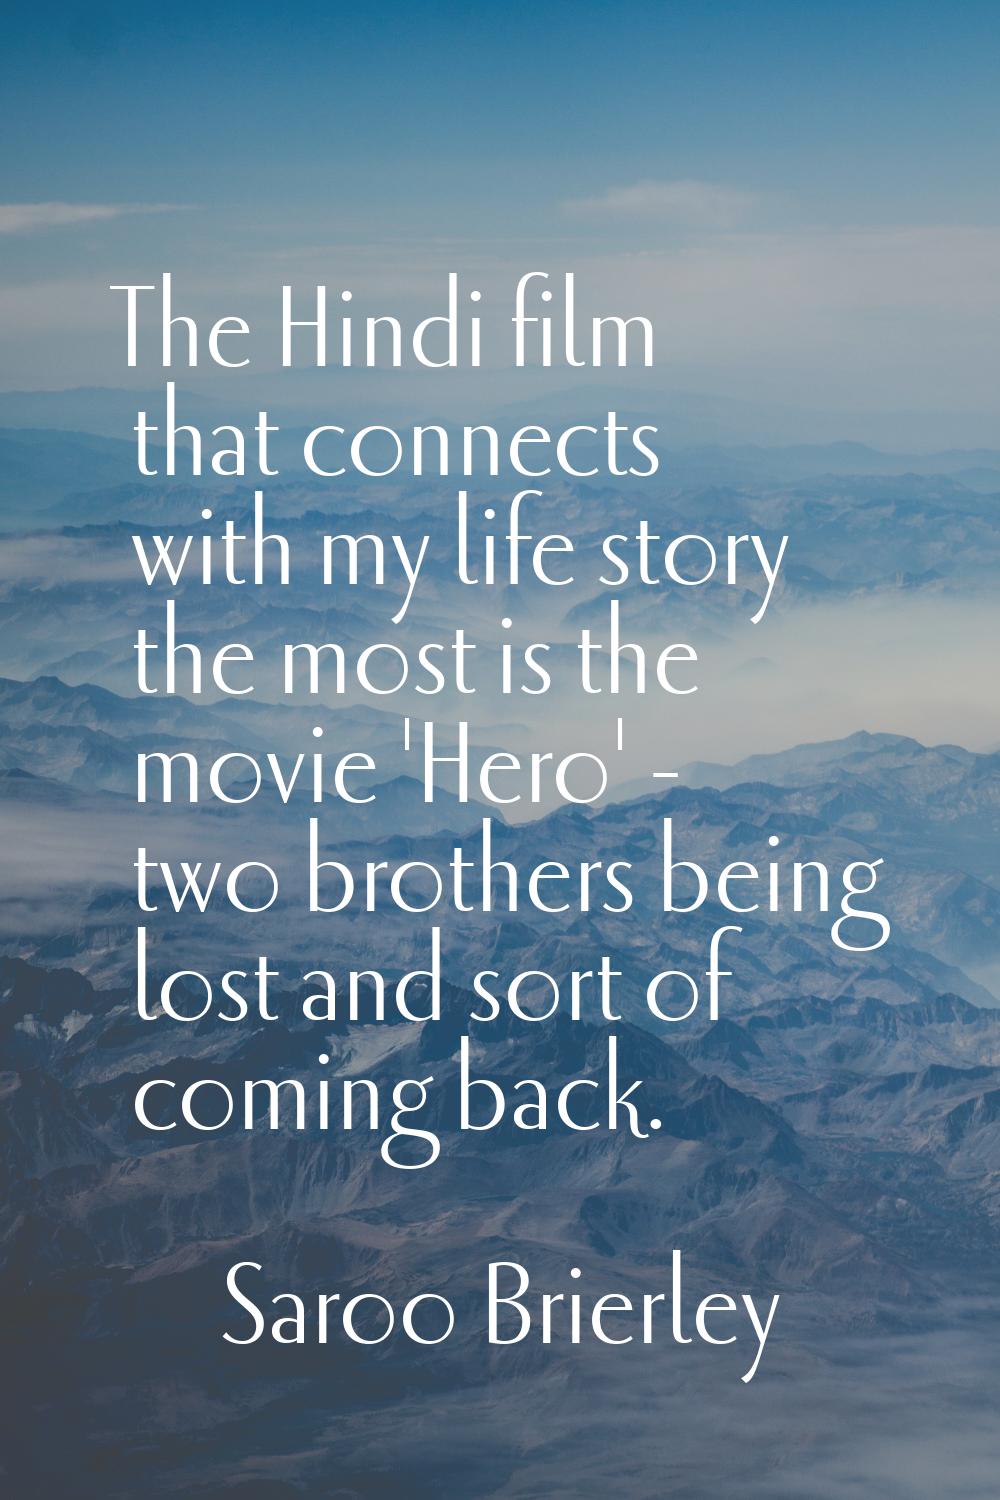 The Hindi film that connects with my life story the most is the movie 'Hero' - two brothers being l